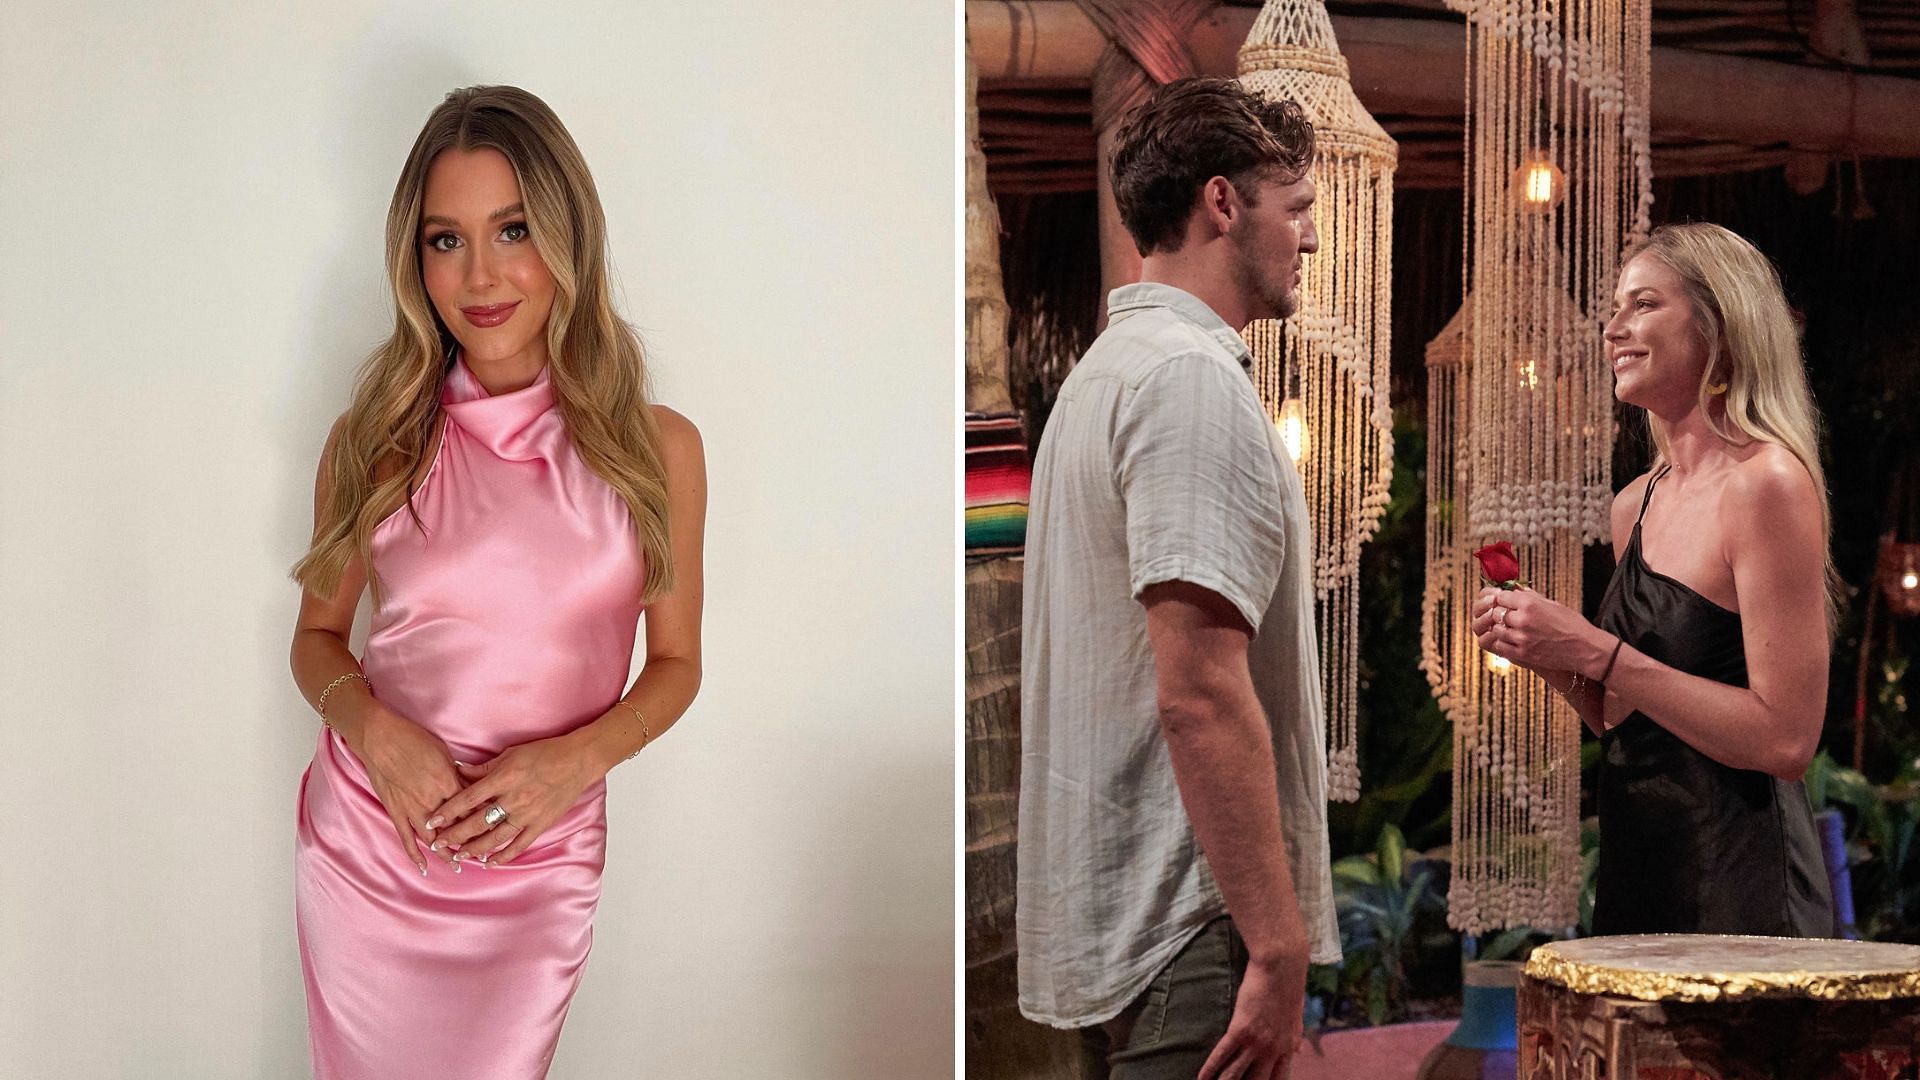 Logan breaks up with Shanae after forming a connection with Kate on Bachelor in Paradise